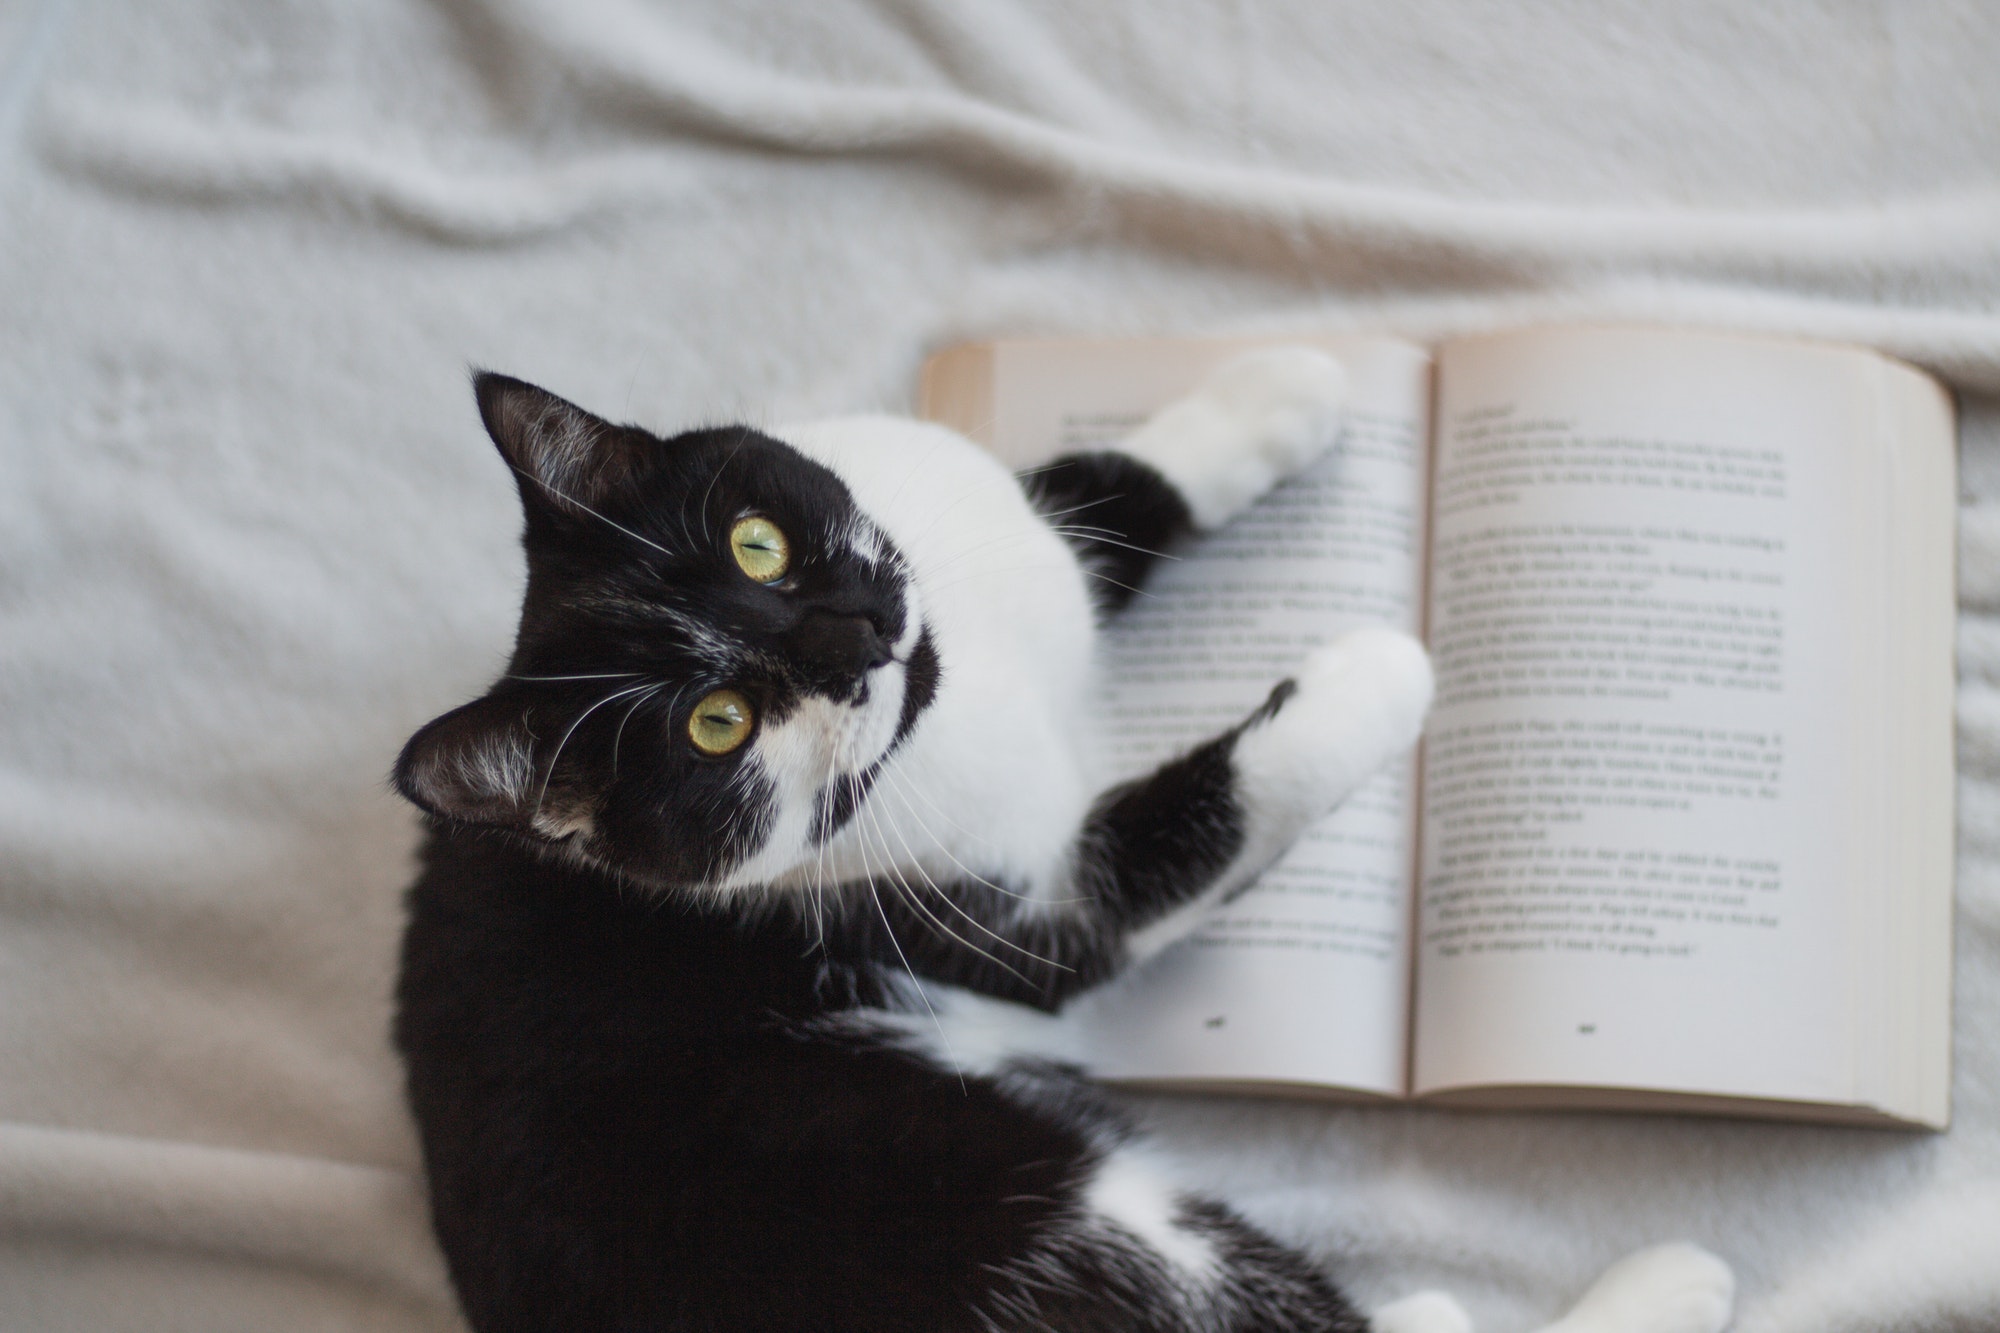 Cat on a Book